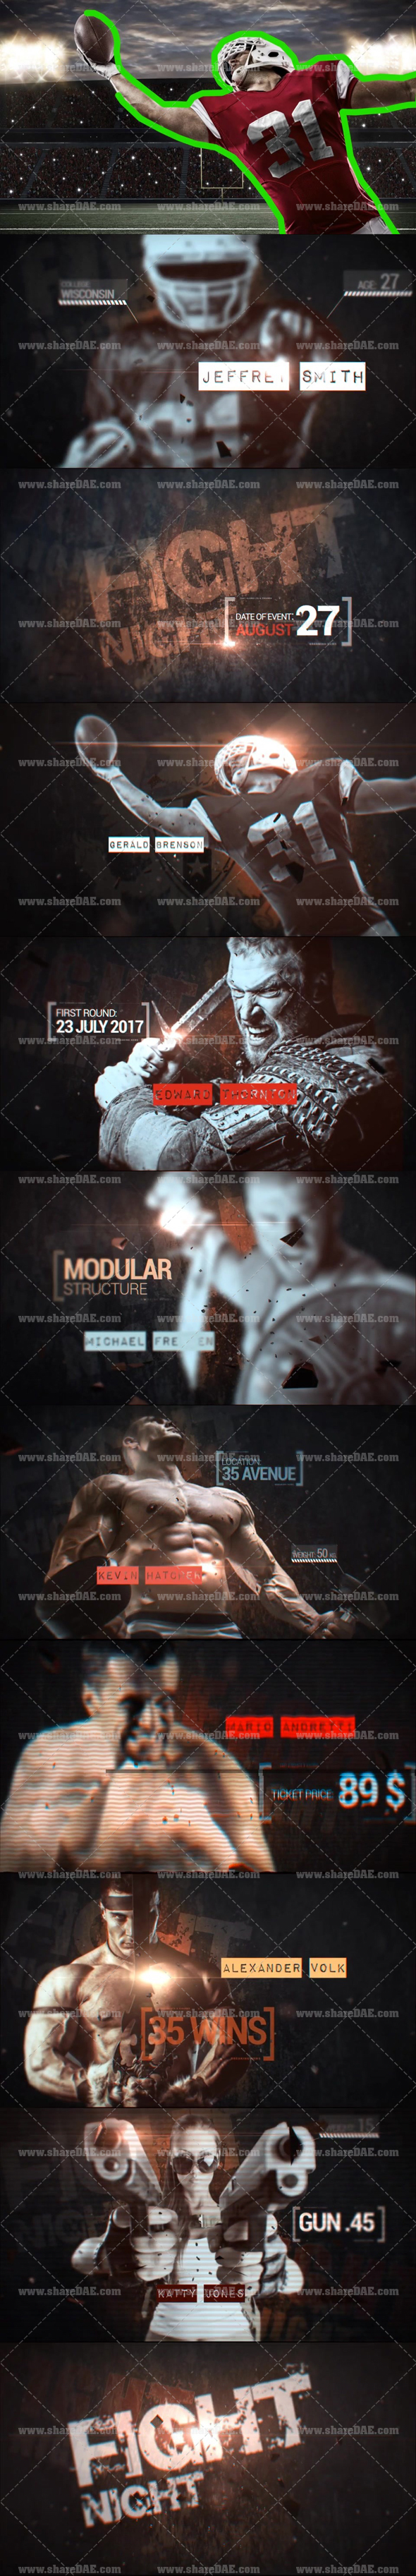 Videohive - Event Promotion 20193754 - Free Download 